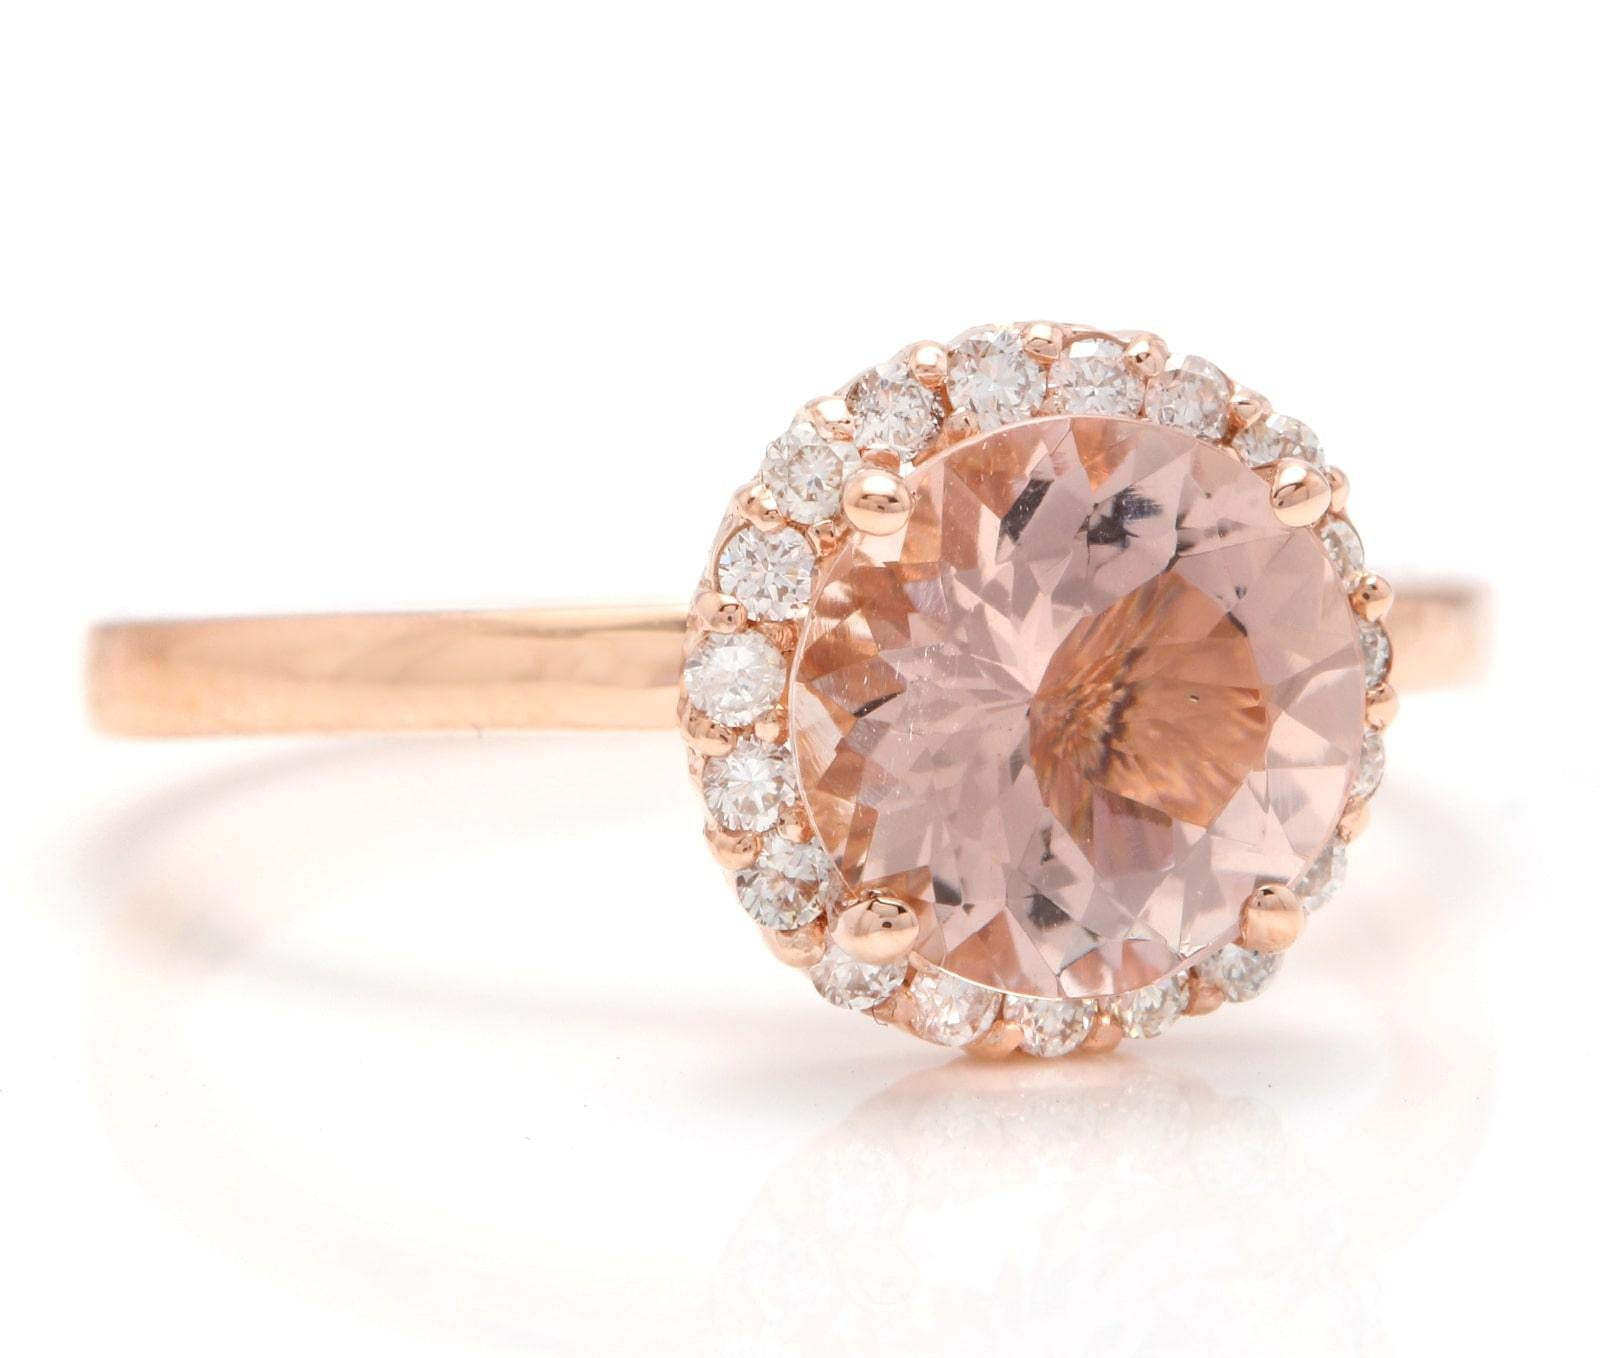 2.00 Carats Natural Morganite and Diamond 14K Solid Rose Gold Ring

Suggested Replacement Value: $1,900.00

Total Natural Oval Morganite Weights: Approx. 1.75 Carats 

Morganite Measures: Approx. 7.00mm

Natural Round Diamonds Weight: Approx. 0.25